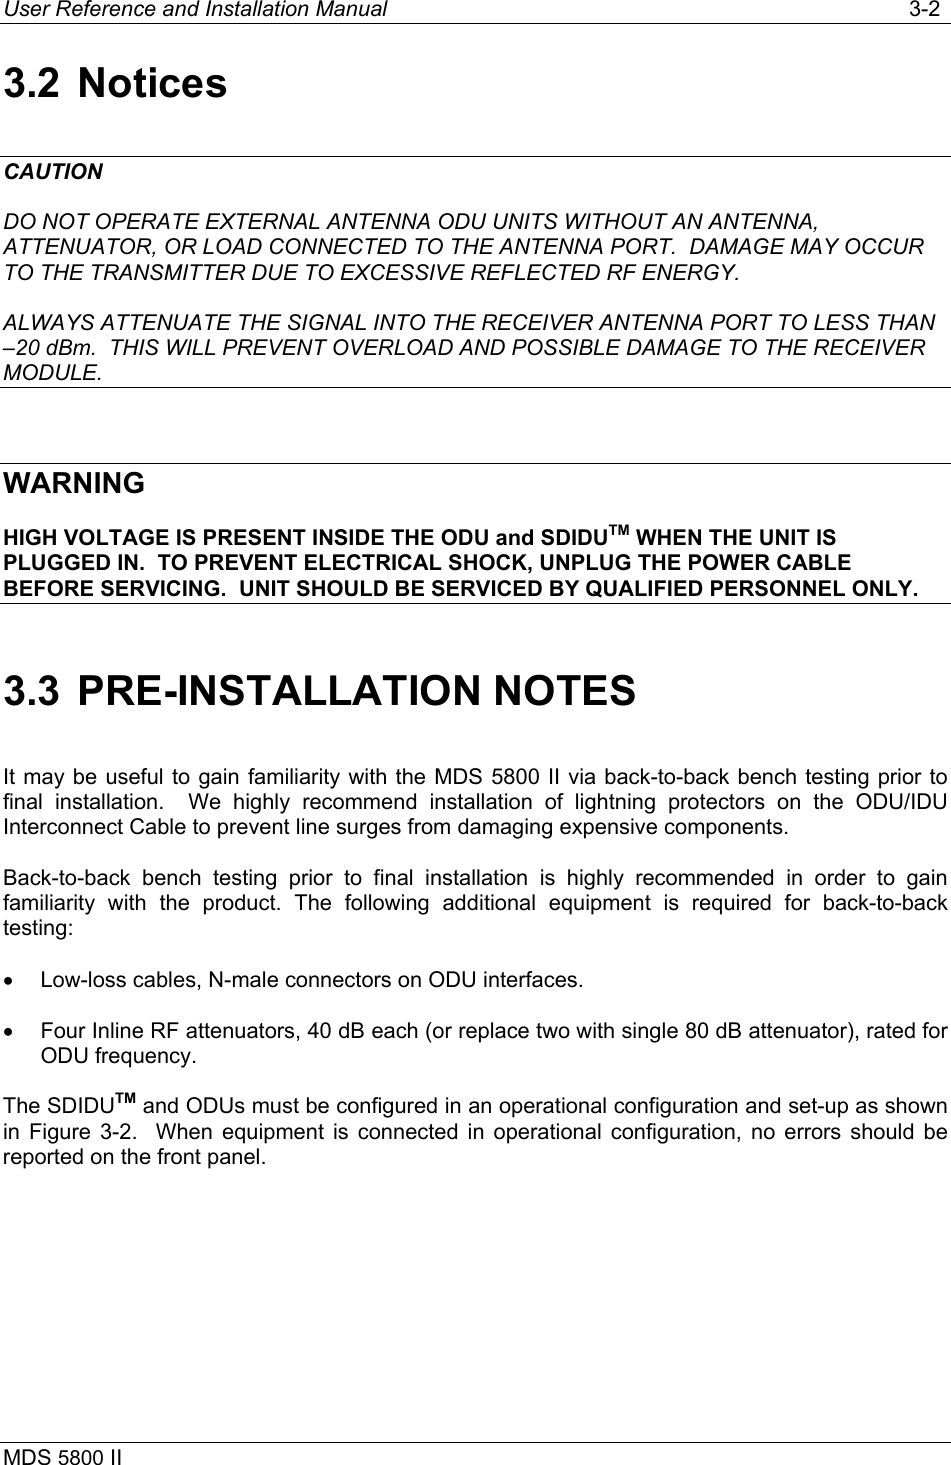 User Reference and Installation Manual   3-2 MDS 5800 II      3.2 Notices CAUTION DO NOT OPERATE EXTERNAL ANTENNA ODU UNITS WITHOUT AN ANTENNA, ATTENUATOR, OR LOAD CONNECTED TO THE ANTENNA PORT.  DAMAGE MAY OCCUR TO THE TRANSMITTER DUE TO EXCESSIVE REFLECTED RF ENERGY. ALWAYS ATTENUATE THE SIGNAL INTO THE RECEIVER ANTENNA PORT TO LESS THAN –20 dBm.  THIS WILL PREVENT OVERLOAD AND POSSIBLE DAMAGE TO THE RECEIVER MODULE.  WARNING HIGH VOLTAGE IS PRESENT INSIDE THE ODU and SDIDUTM WHEN THE UNIT IS PLUGGED IN.  TO PREVENT ELECTRICAL SHOCK, UNPLUG THE POWER CABLE BEFORE SERVICING.  UNIT SHOULD BE SERVICED BY QUALIFIED PERSONNEL ONLY. 3.3 PRE-INSTALLATION NOTES It may be useful to gain familiarity with the MDS 5800 II via back-to-back bench testing prior to final installation.  We highly recommend installation of lightning protectors on the ODU/IDU Interconnect Cable to prevent line surges from damaging expensive components. Back-to-back bench testing prior to final installation is highly recommended in order to gain familiarity with the product. The following additional equipment is required for back-to-back testing: •  Low-loss cables, N-male connectors on ODU interfaces. •  Four Inline RF attenuators, 40 dB each (or replace two with single 80 dB attenuator), rated for ODU frequency. The SDIDUTM and ODUs must be configured in an operational configuration and set-up as shown in Figure 3-2.  When equipment is connected in operational configuration, no errors should be reported on the front panel.  